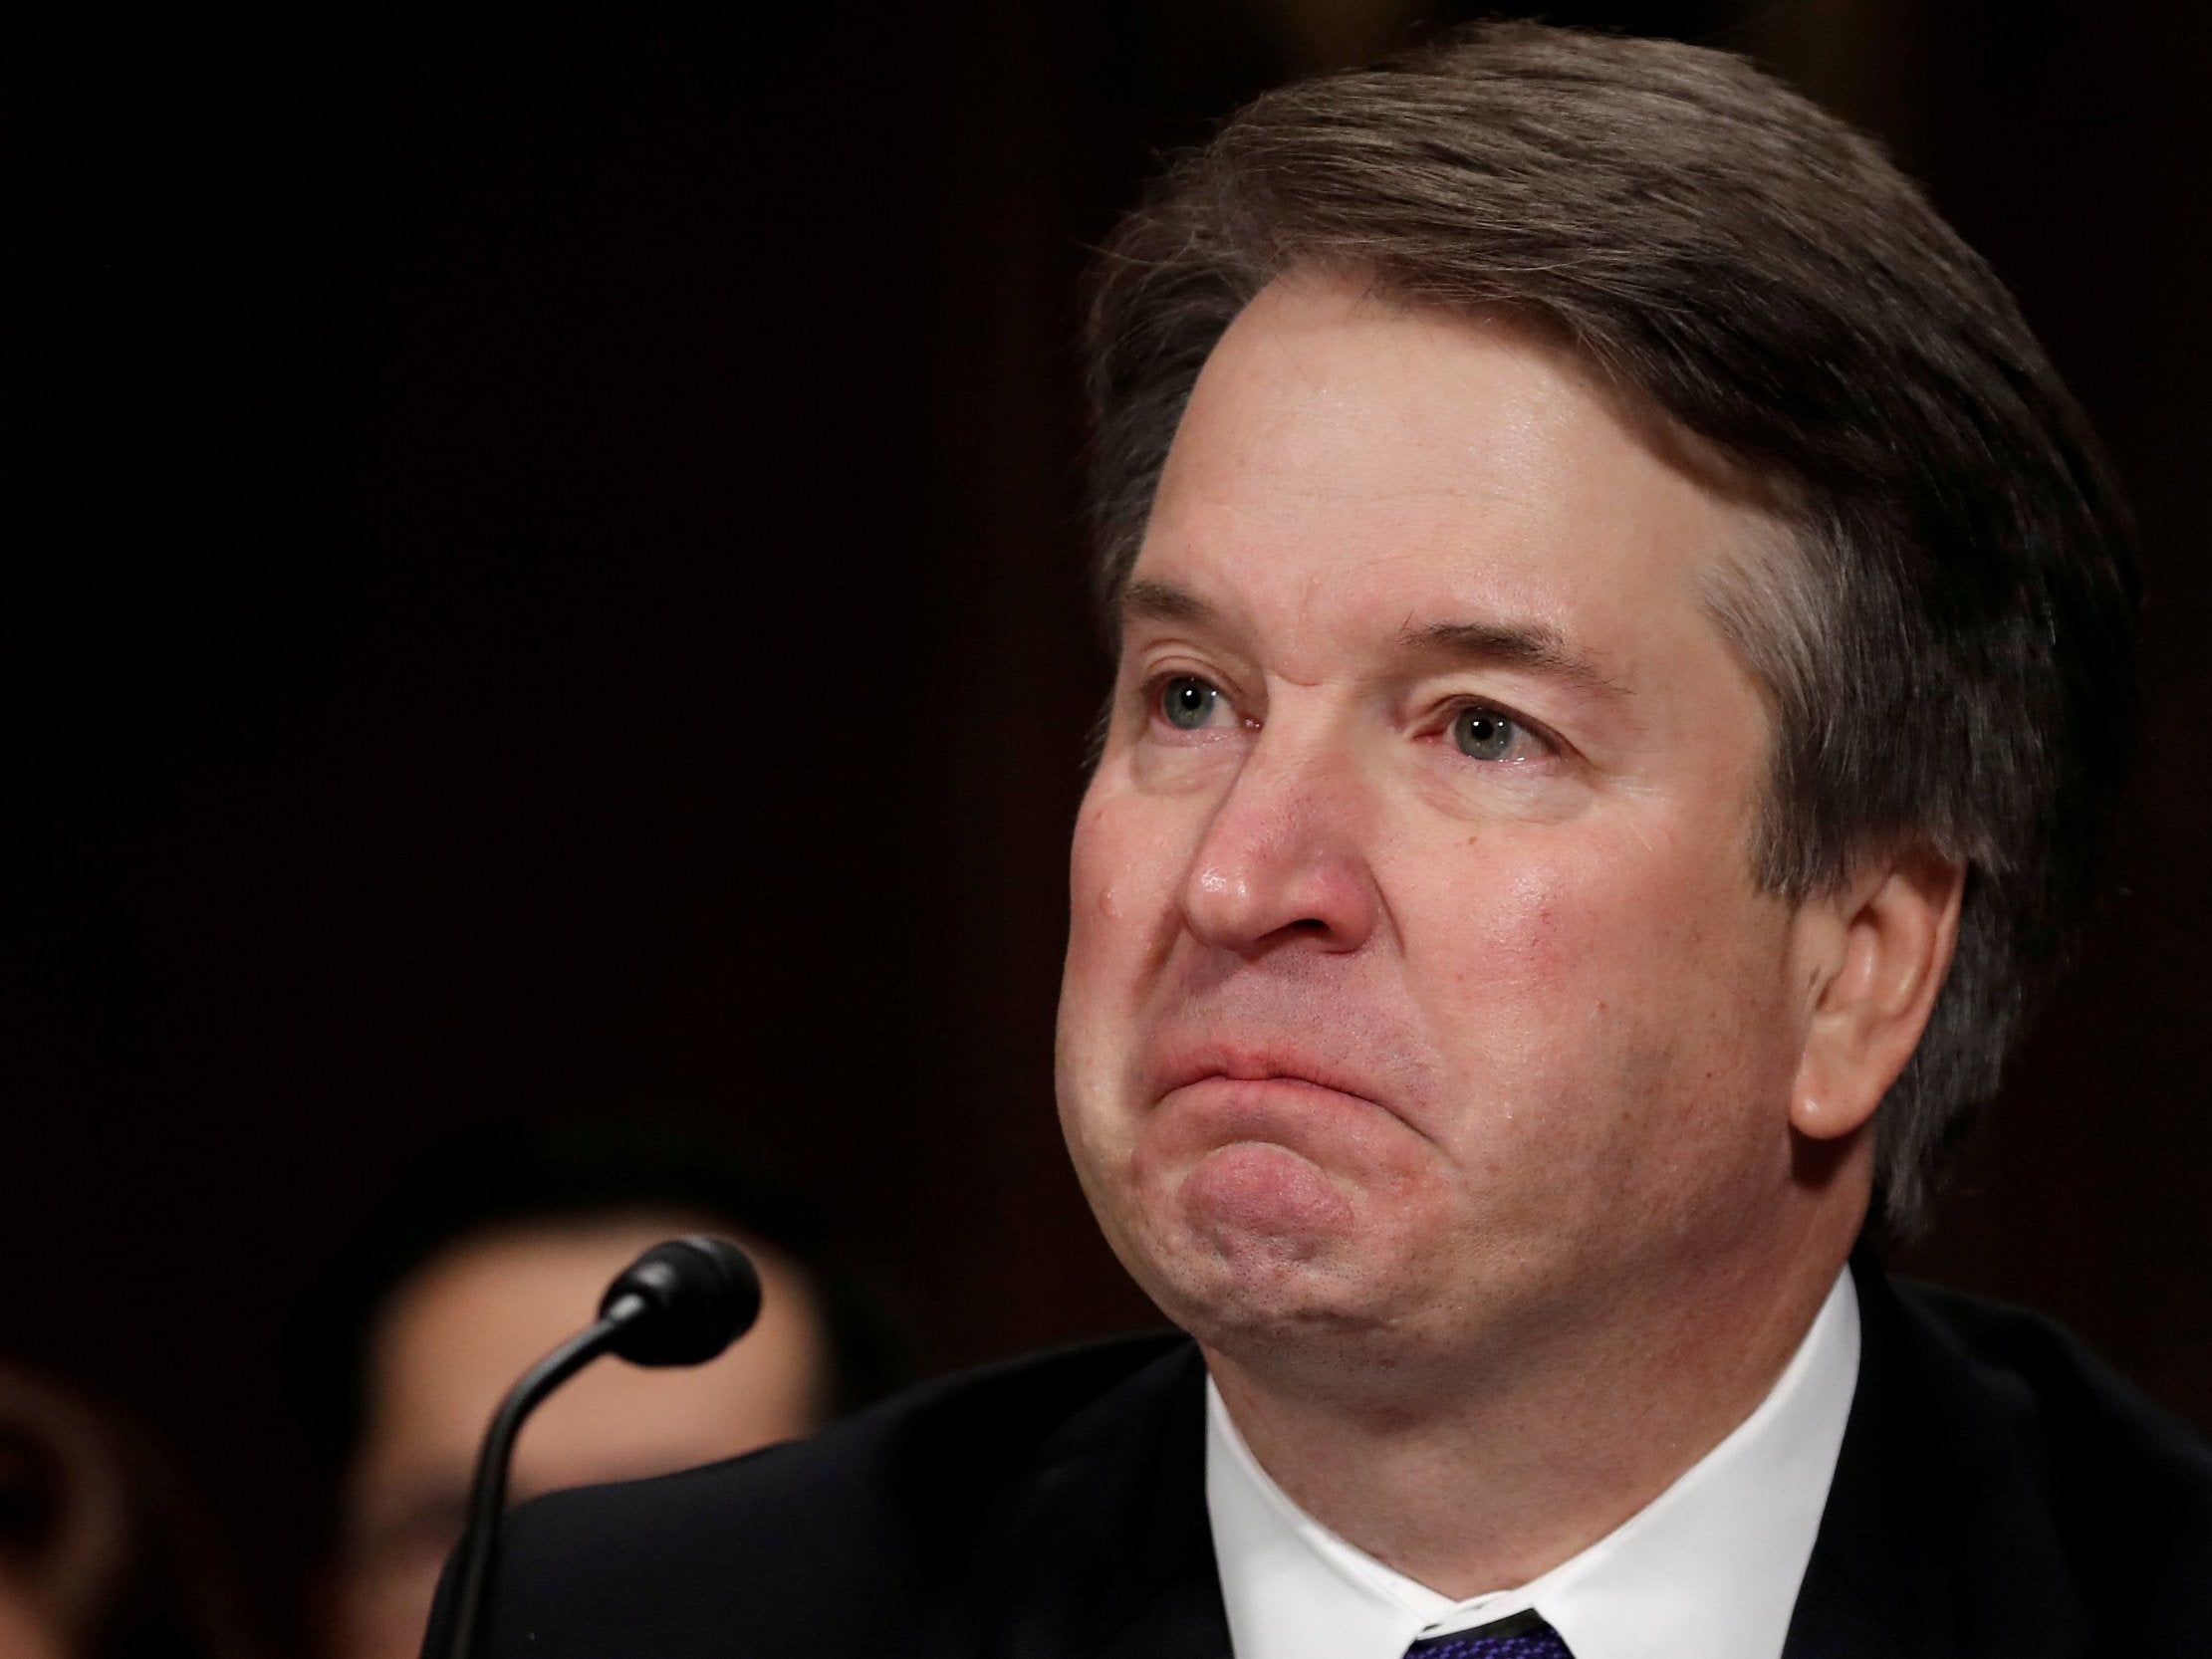 The cartoon was a parody of Kavanaugh's opening statement in which he quoted his daughter to 'pray' for Christine Blasey